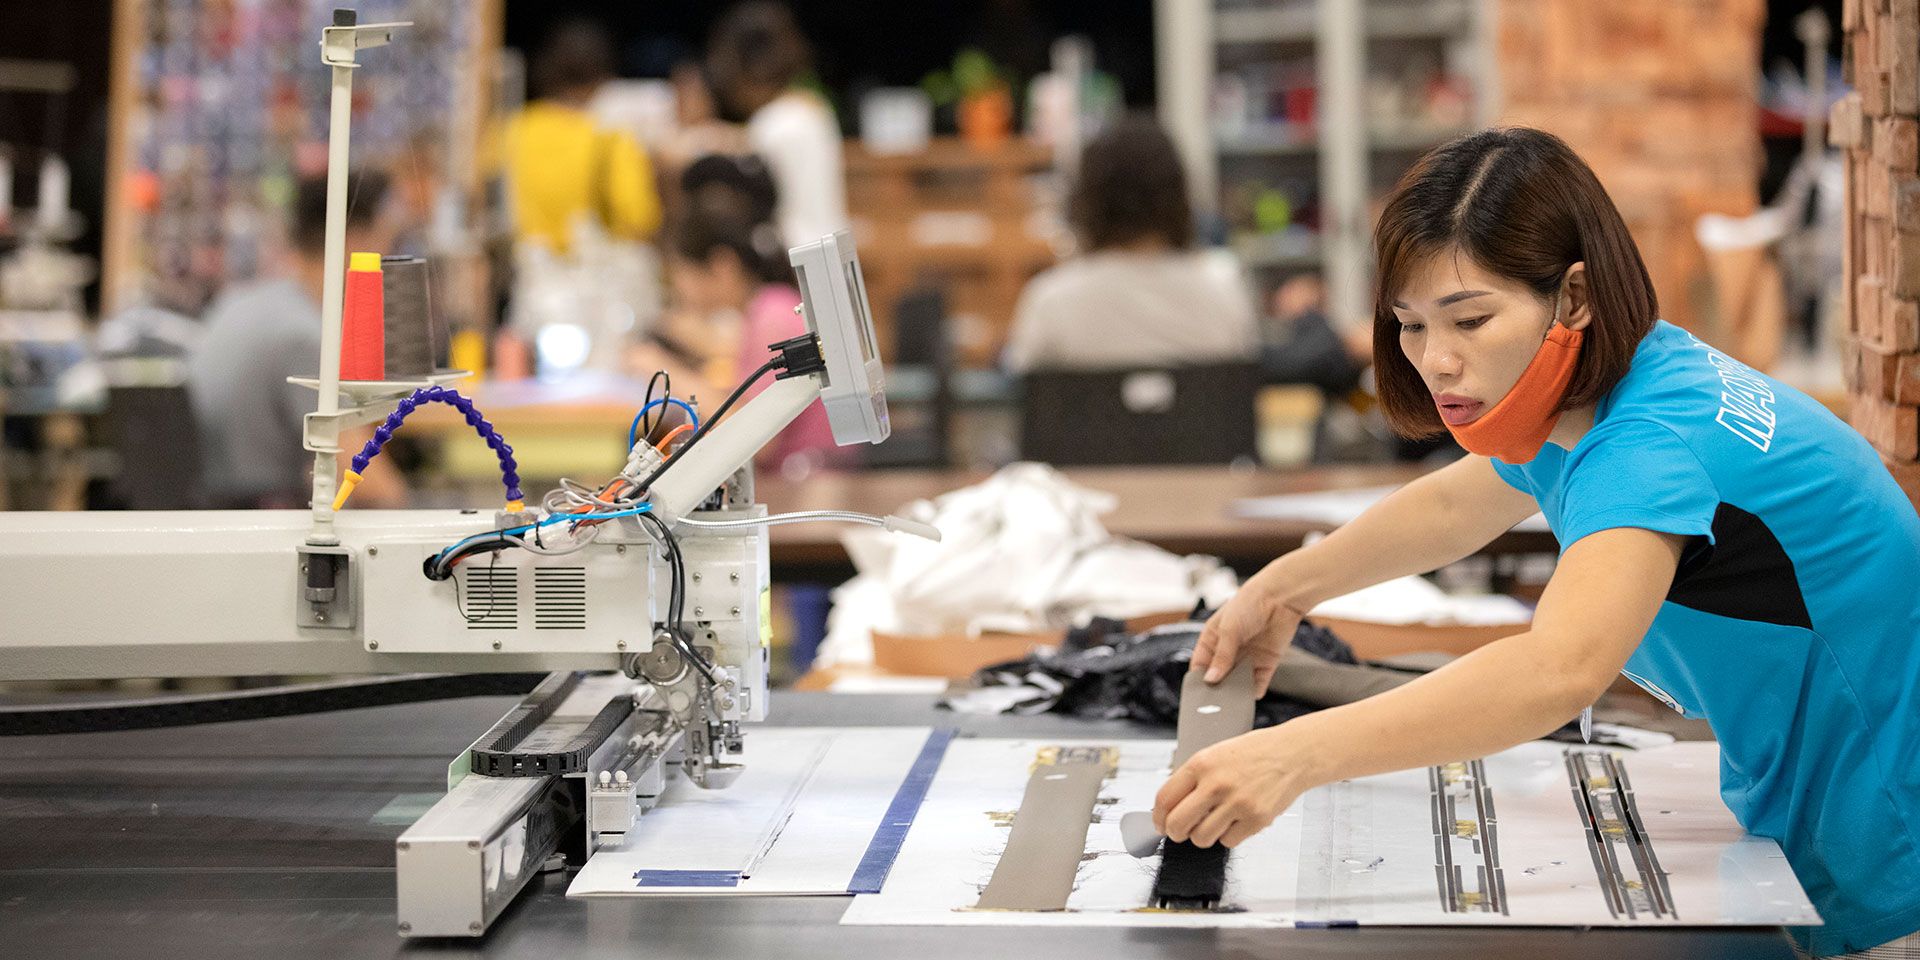 Maxport Limited employees work in the Hanoi facilities in Hanoi, Vietnam on July 27, 2019. Maxport Limited employs 6,500 workers and sells high-end sportswear primarily to Nike and Lululemon. Maxport Limited is also an Employer of Choice for Women, including EDGE (Economic Dividends for Gender Equality) assessment and certification, gender equal leadership pipeline development, and a strategy to support workers with childcare. Photo @ Dominic Chavez/International Finance Corporation